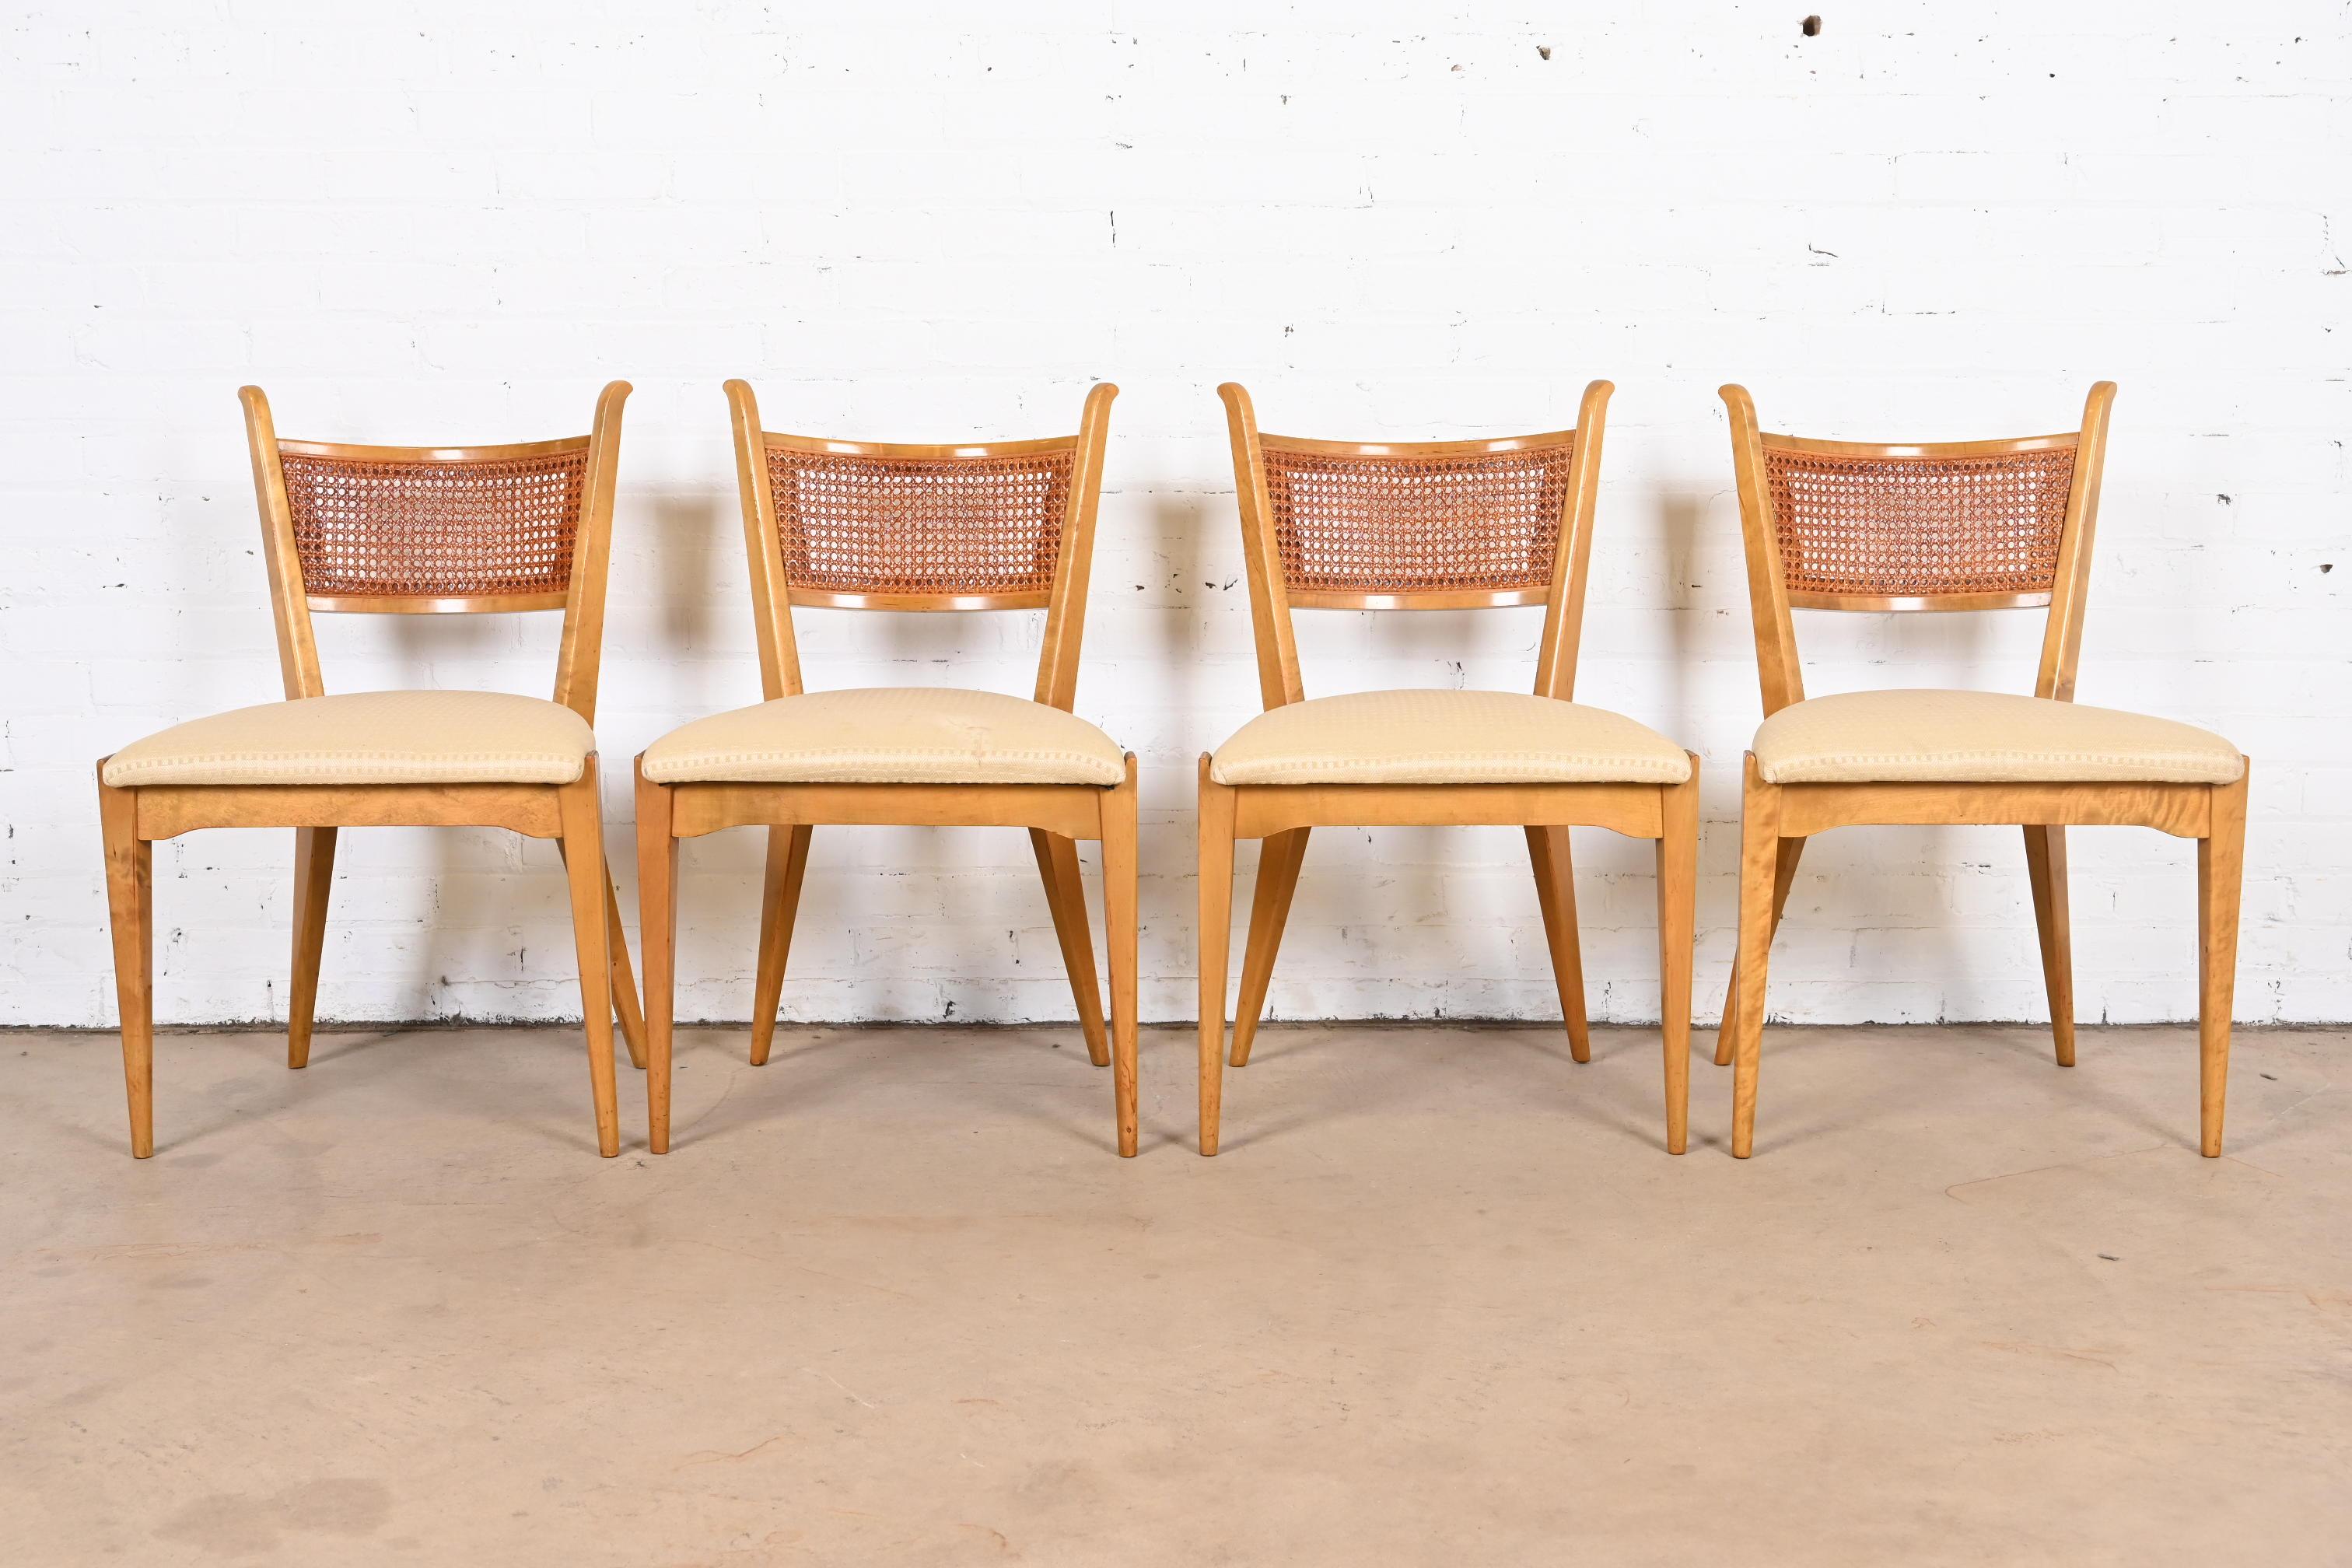 Scandinavian Modern Edmond Spence Swedish Modern Sculpted Maple and Cane Dining Chairs, Set of Four For Sale